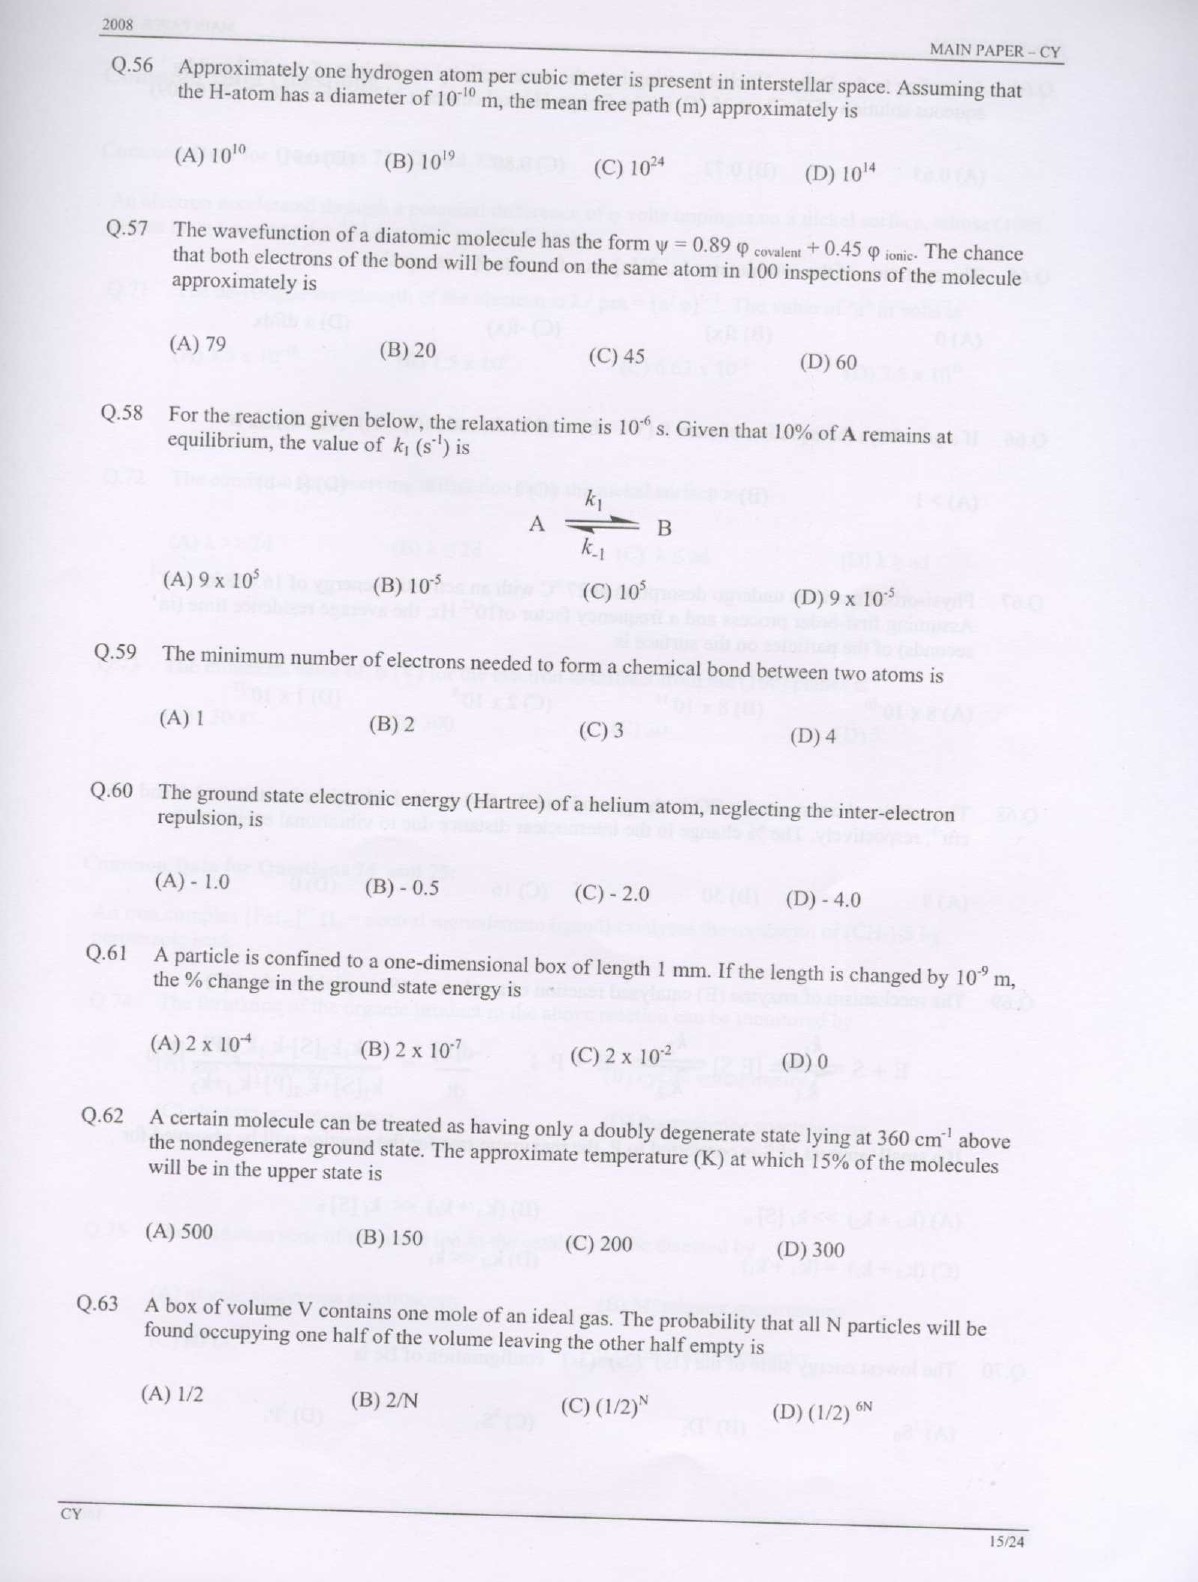 GATE Exam Question Paper 2008 Chemistry 15